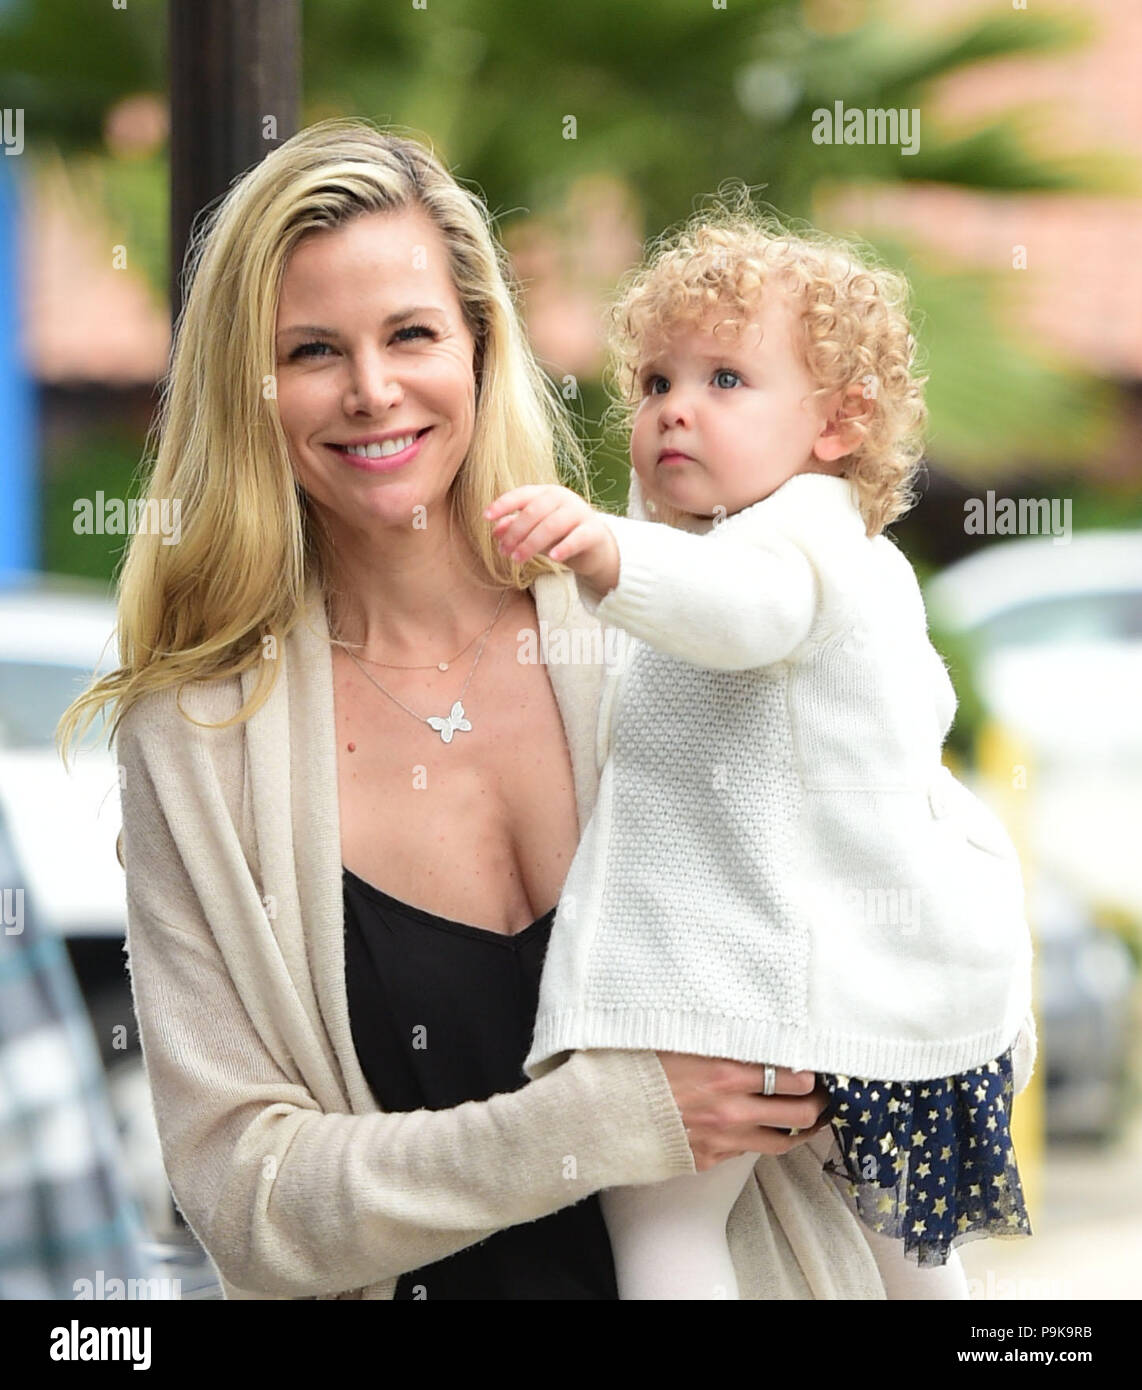 Declan Welles Biography: All You Need to Know About the Celebrity Brooke Burns' daughter